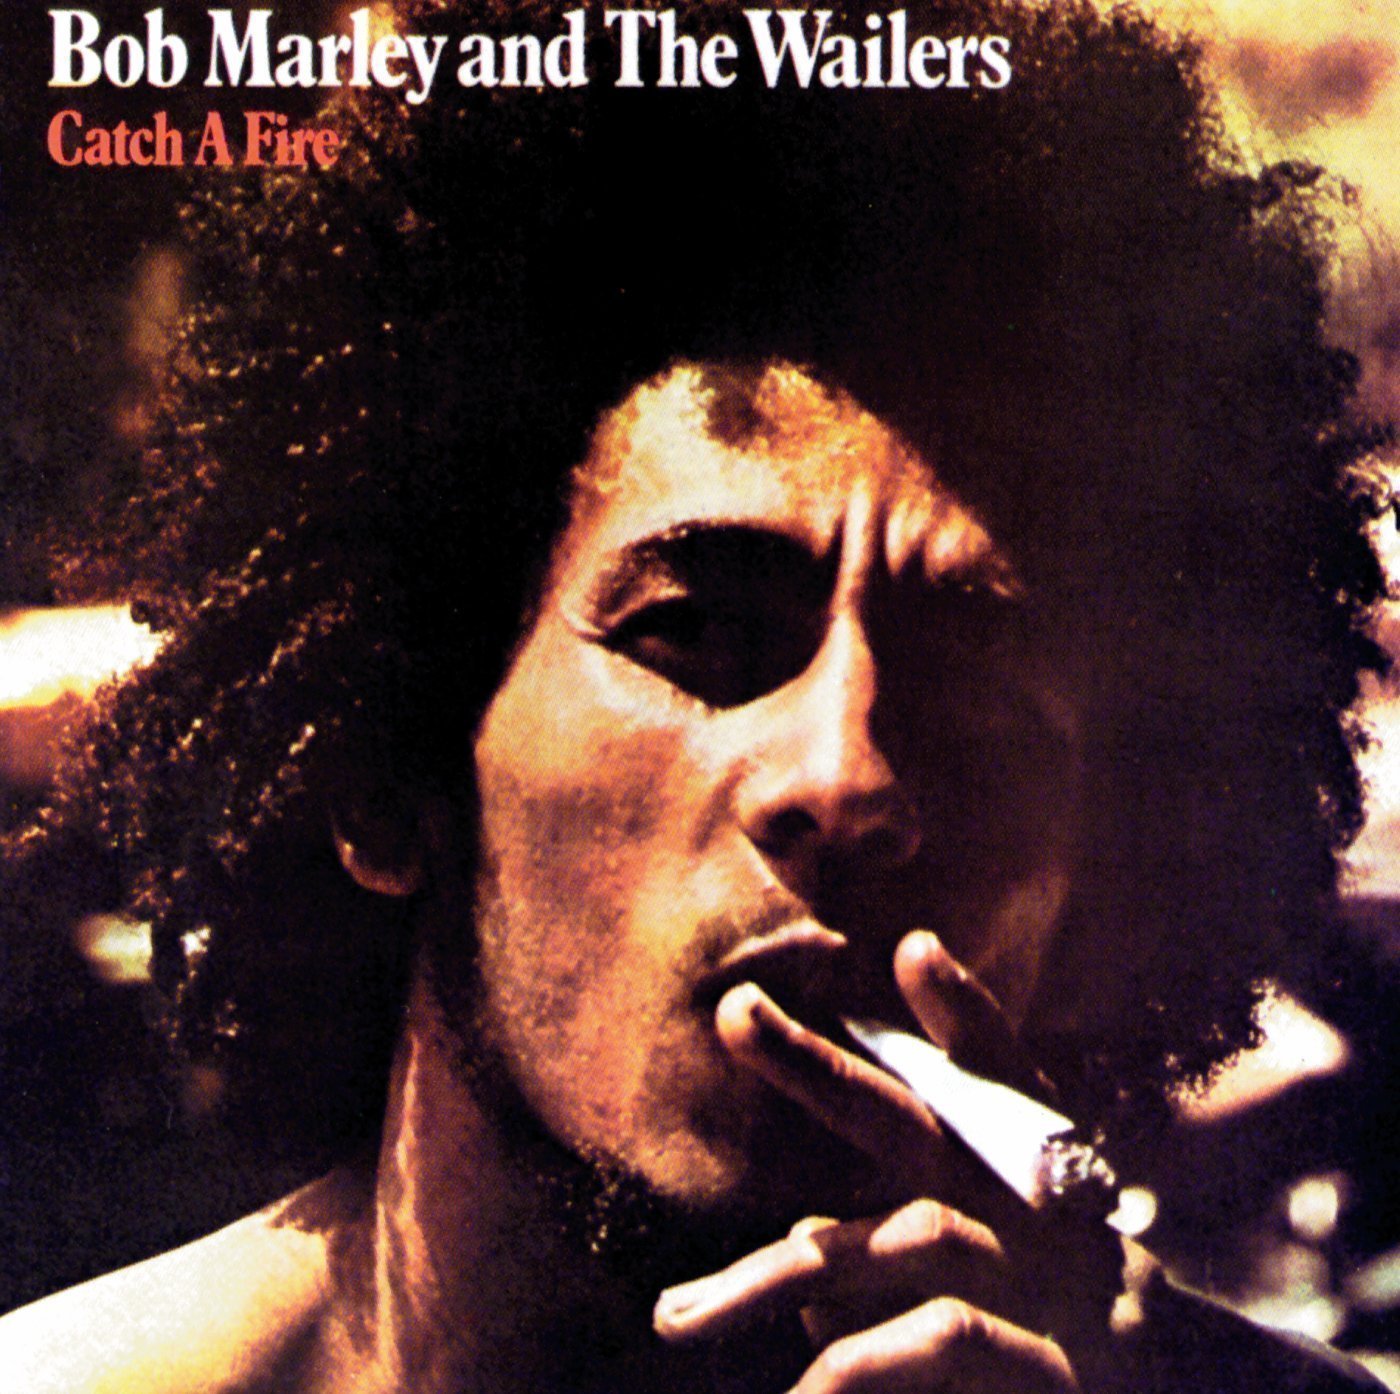 Vinyl Record Bob Marley & The Wailers - Catch A Fire (LP)